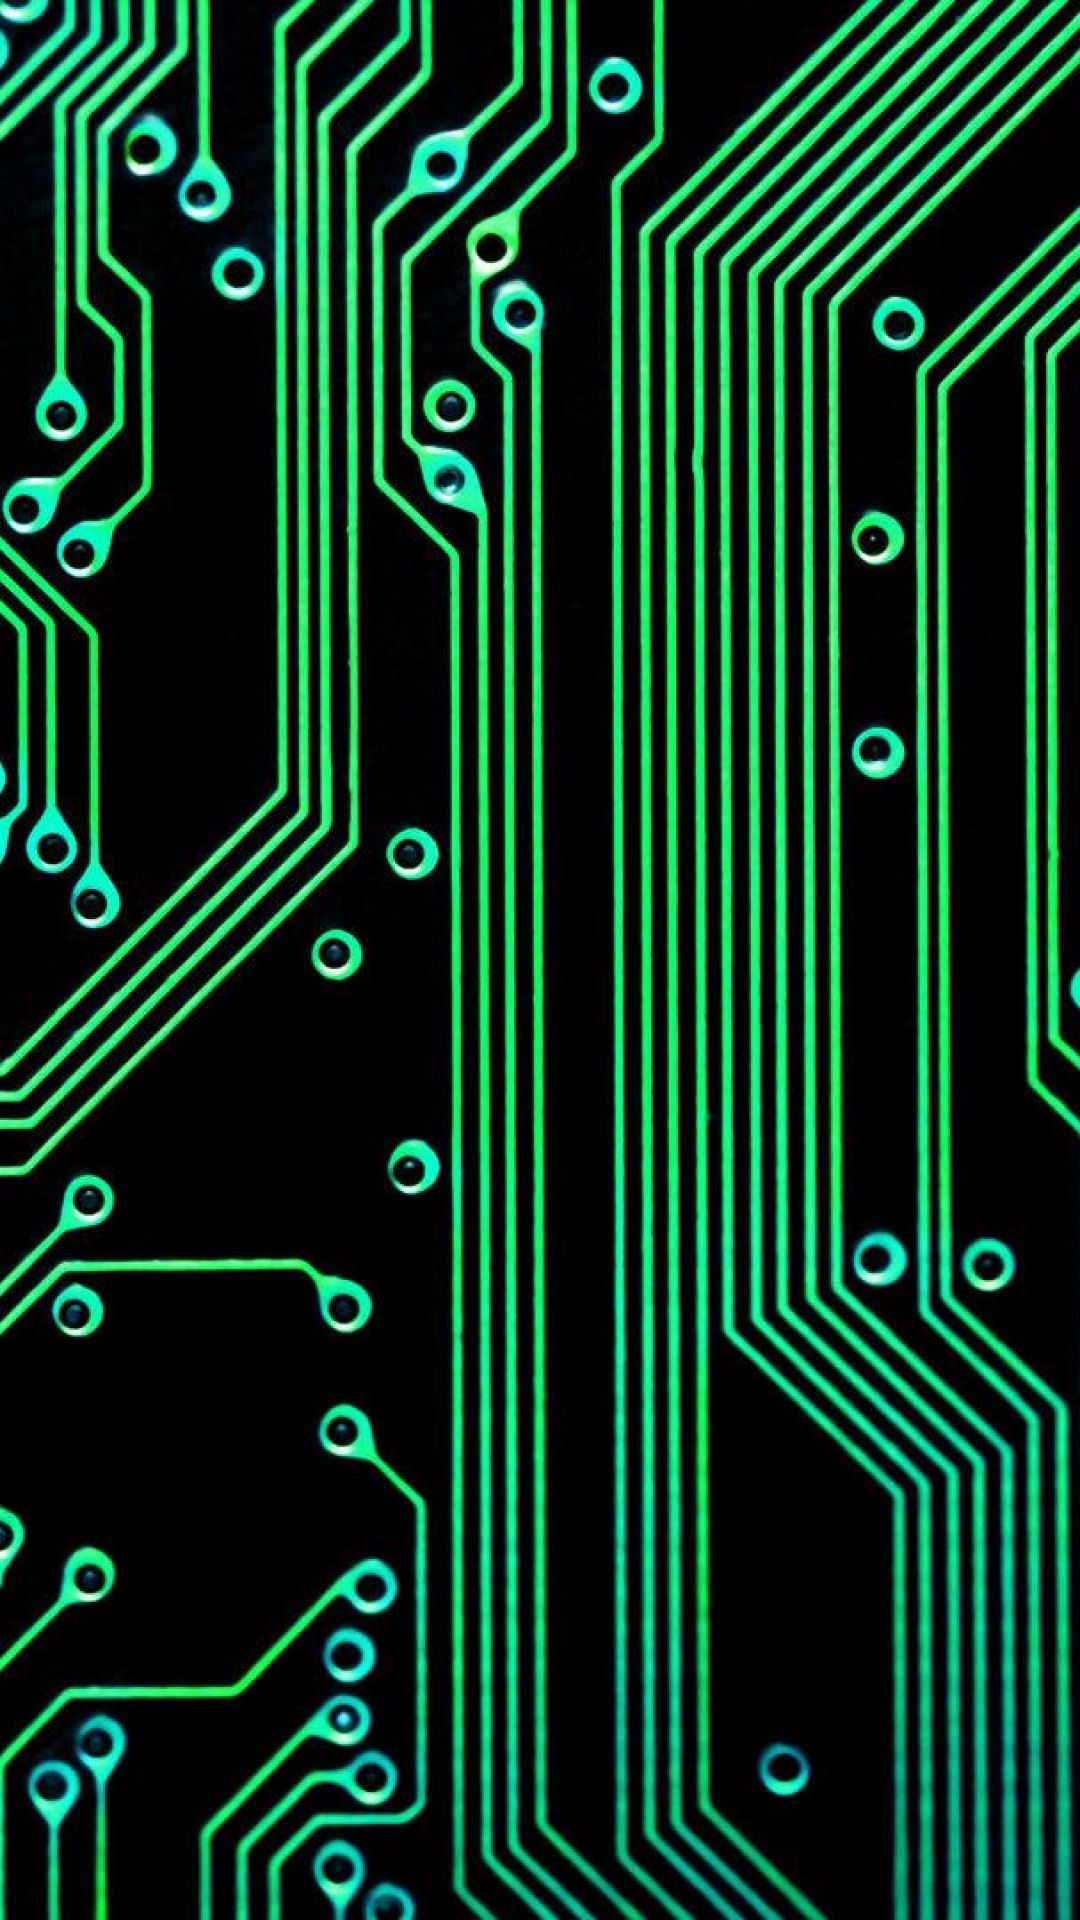 Green Electronic Circuits wallpaper. iOS wallpaper and Android